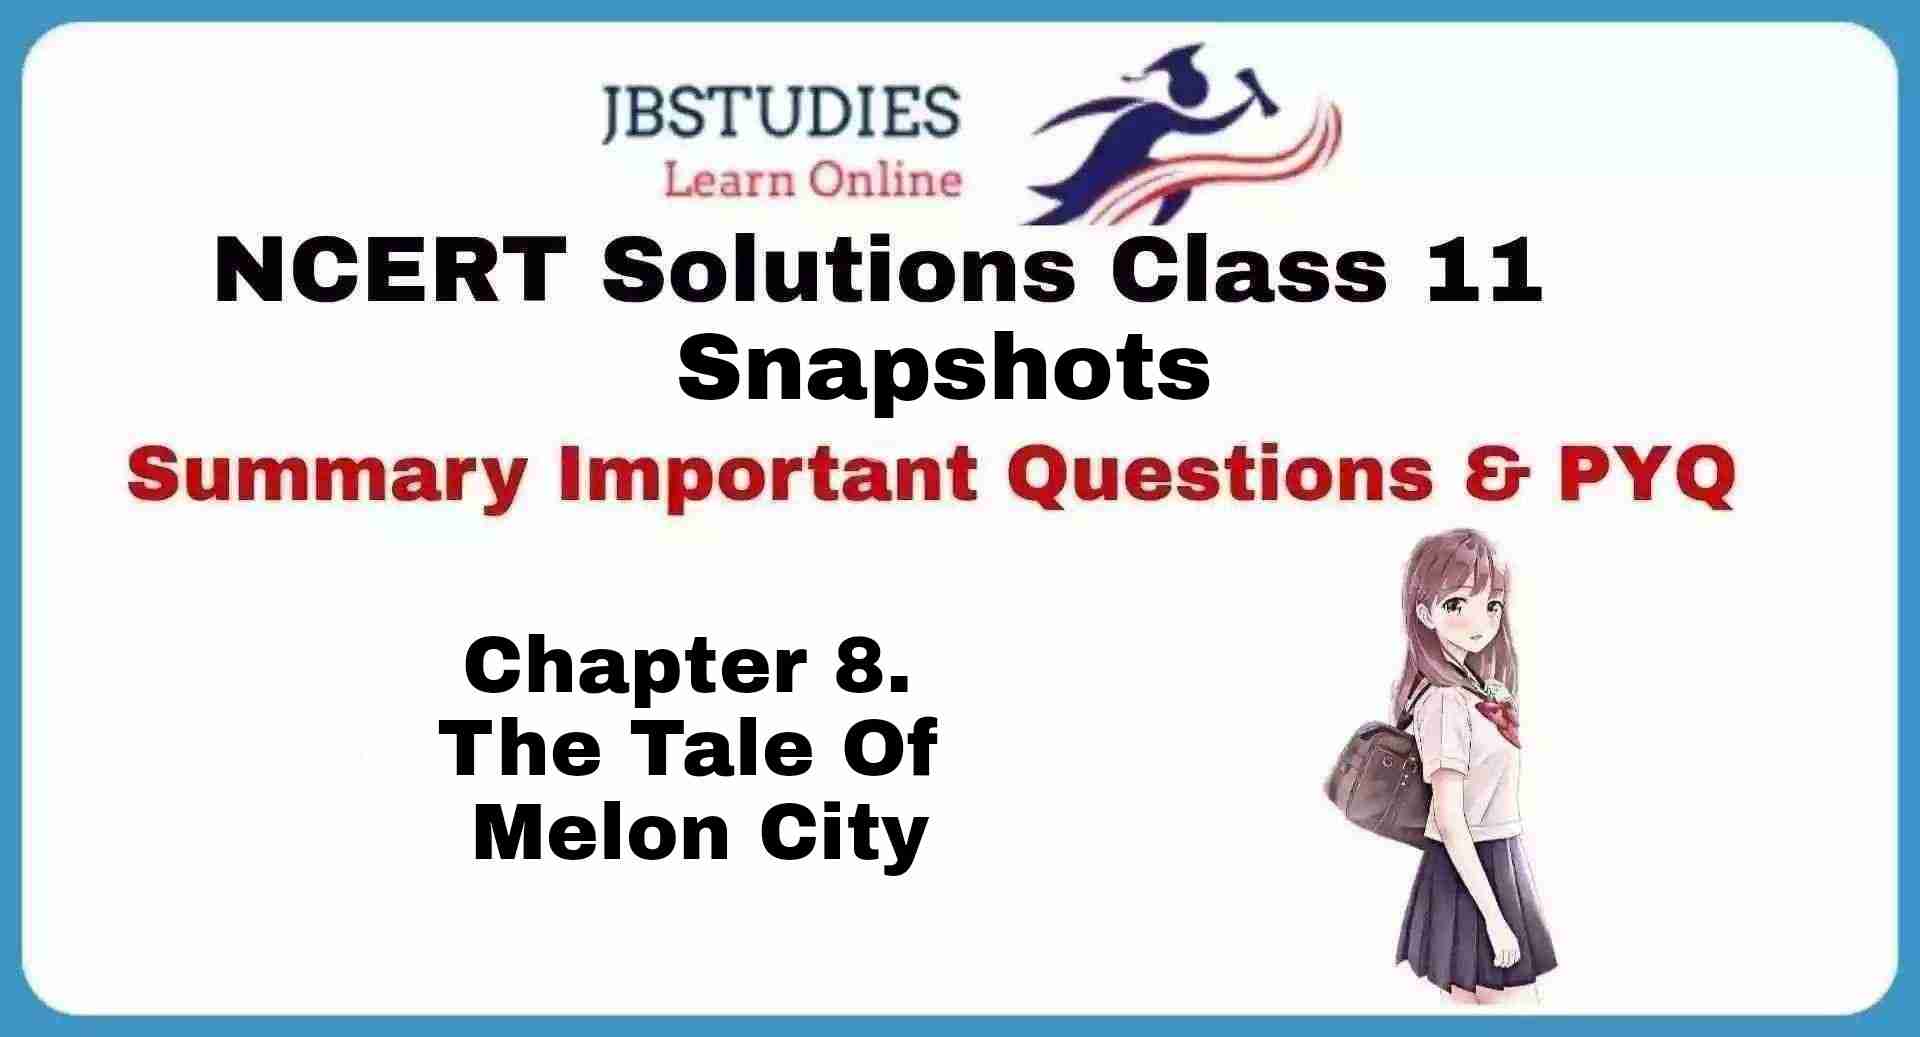 Solutions Class 11 Snapshots Chapter-8 The Tale of Melon City